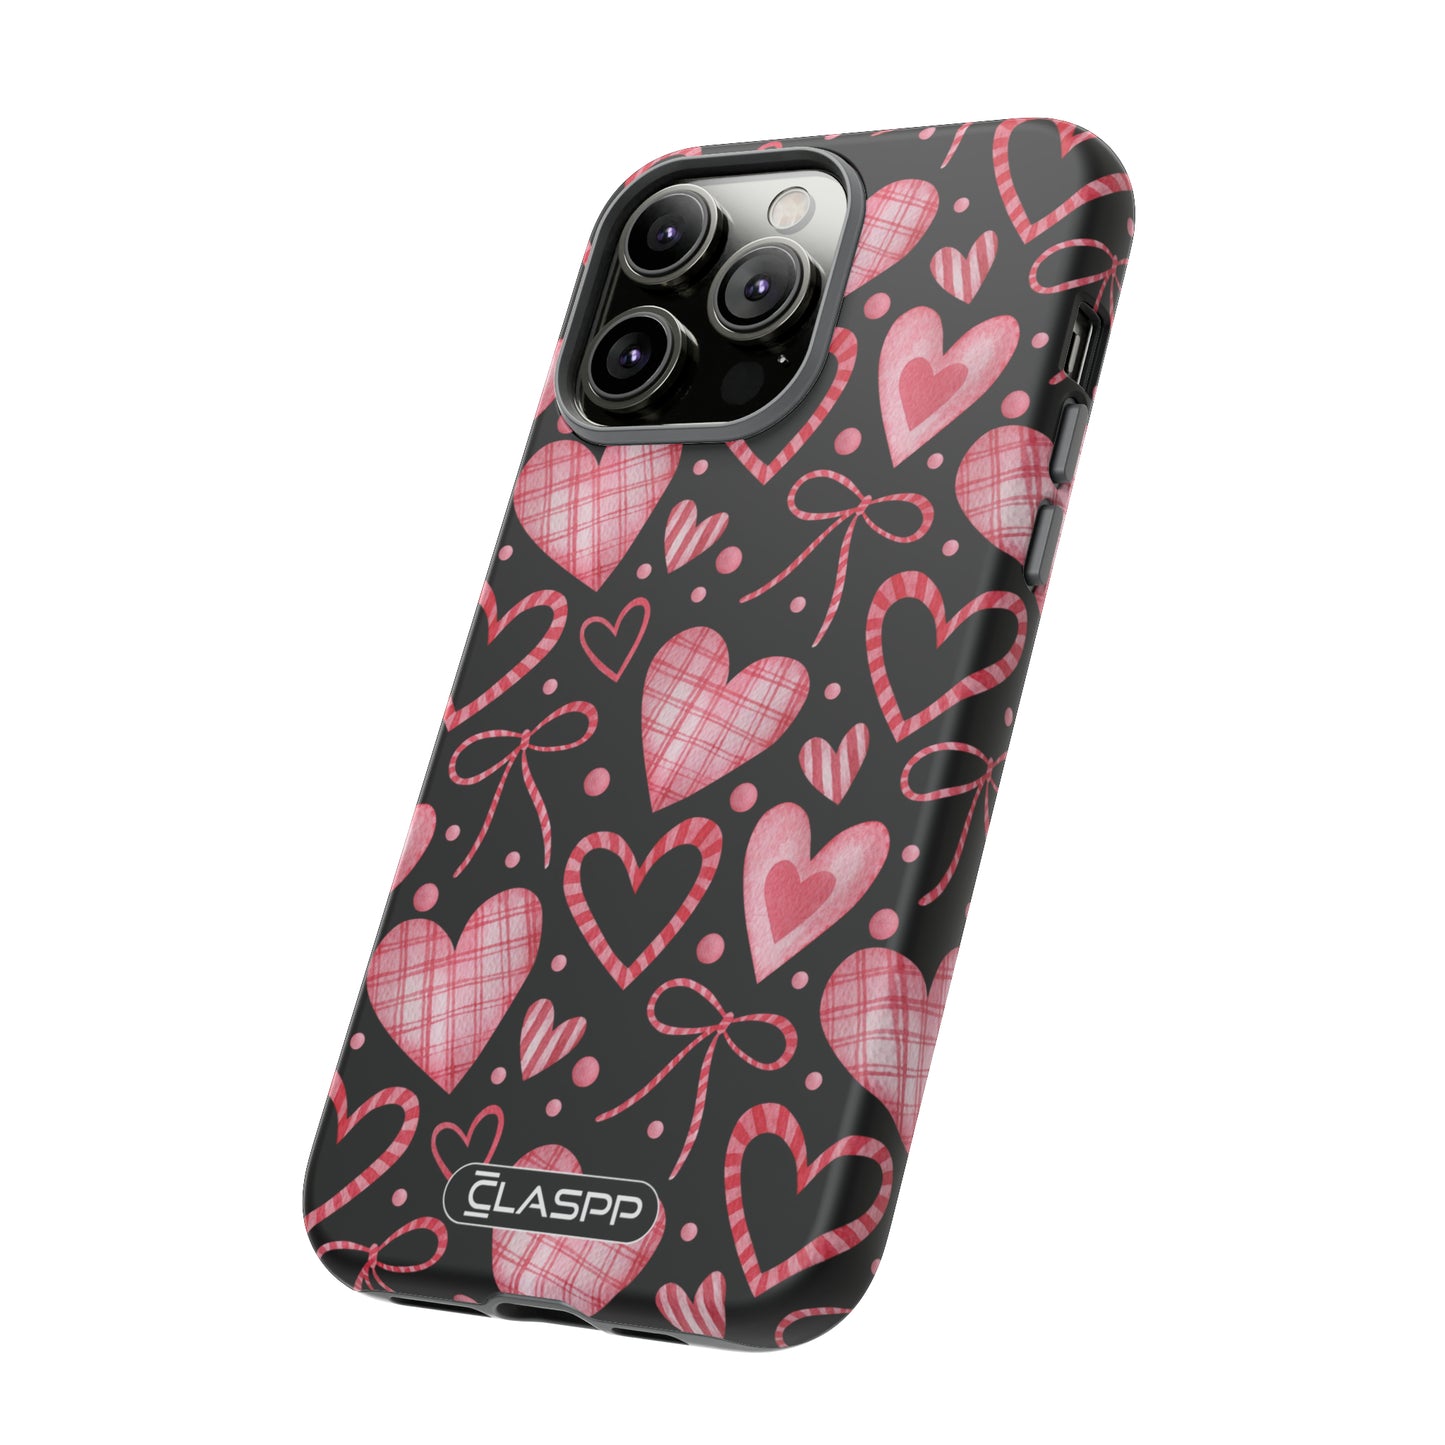 Heartbeat Haven | Valentine's Day | Hardshell Dual Layer Phone Case